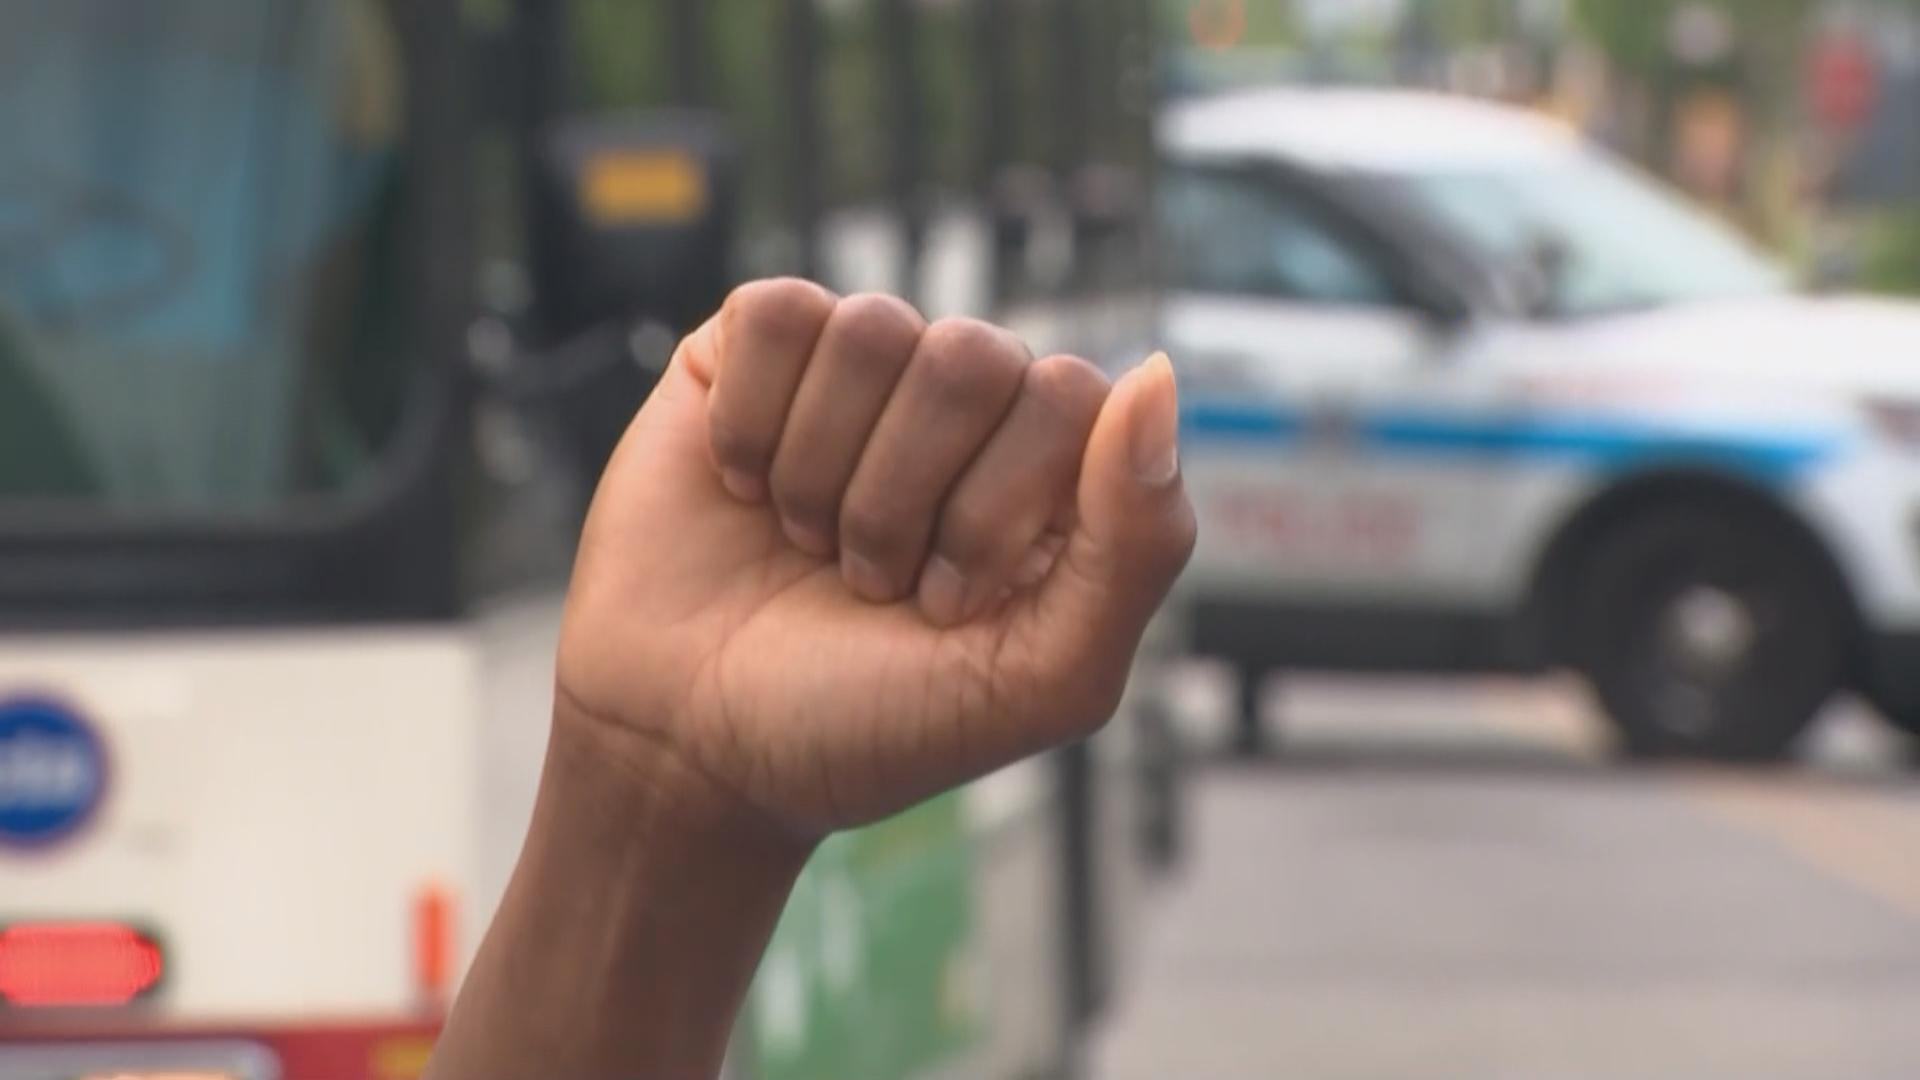 A demonstrator raises a fist during a peace rally organized by St. Sabina Church on June 4, 2020 in Chicago. Some activists and officials are concerned that federal agents coming to Chicago will exacerbate violence, including clashes between protesters and police. (WTTW News)